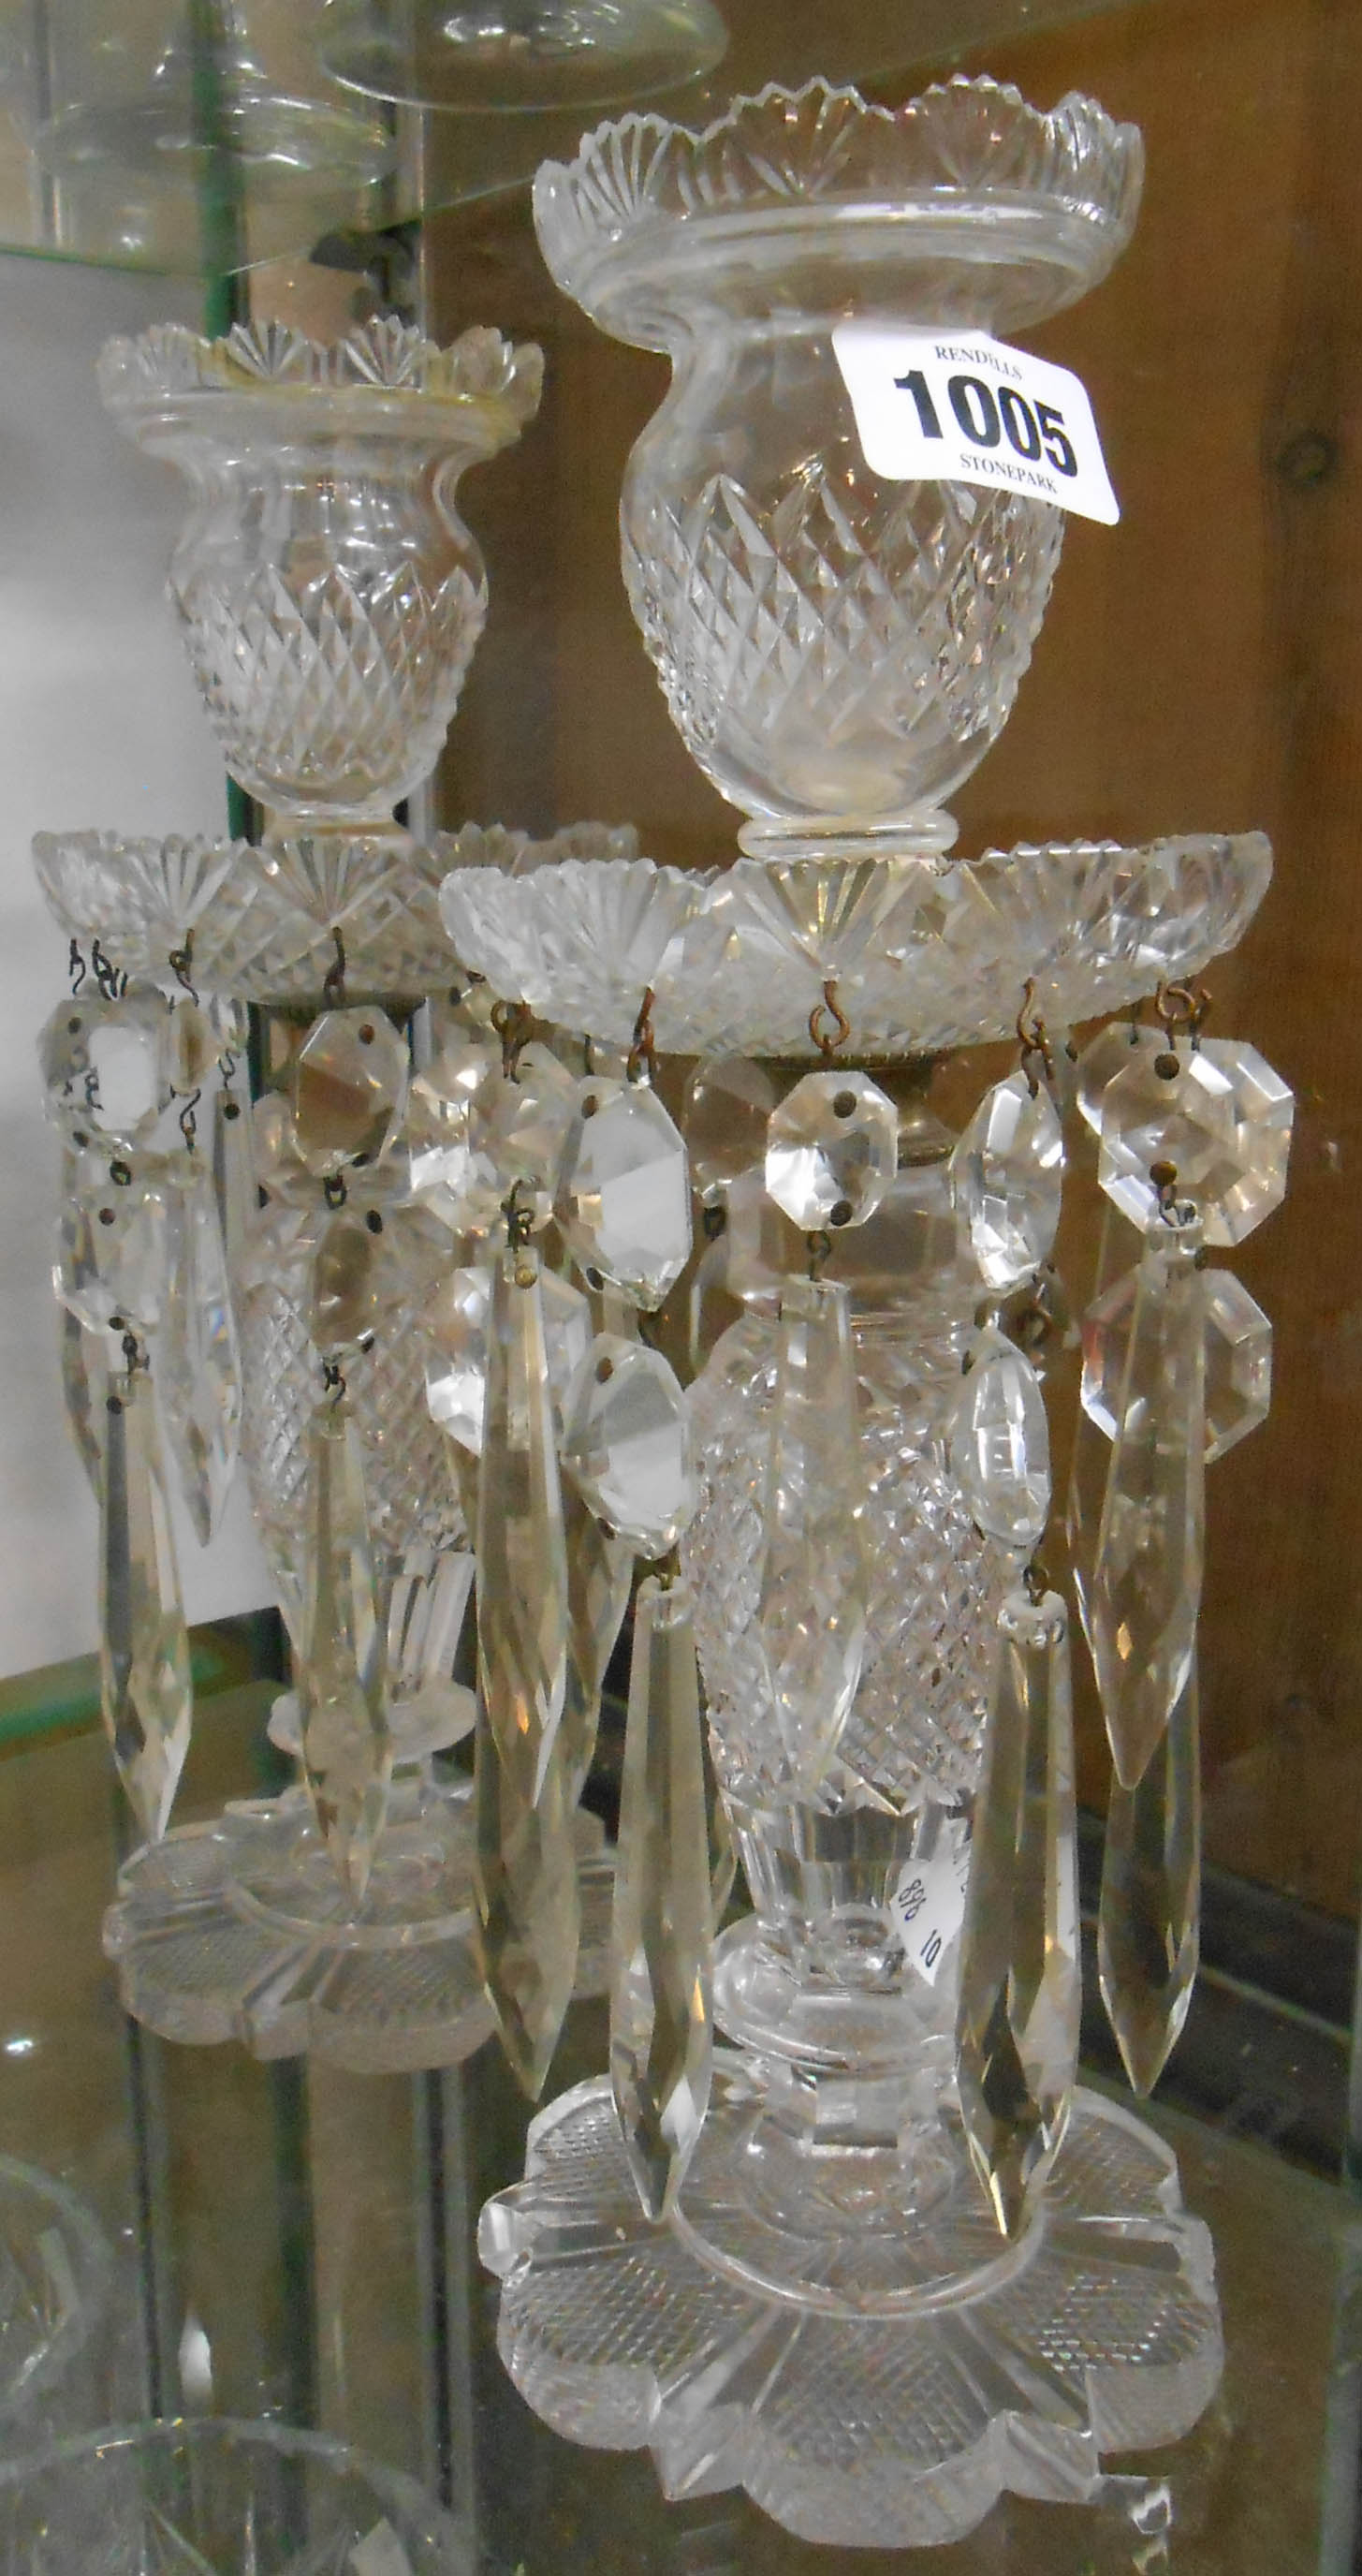 A pair of Edwardian cut glass table lustres with drops - one a/f